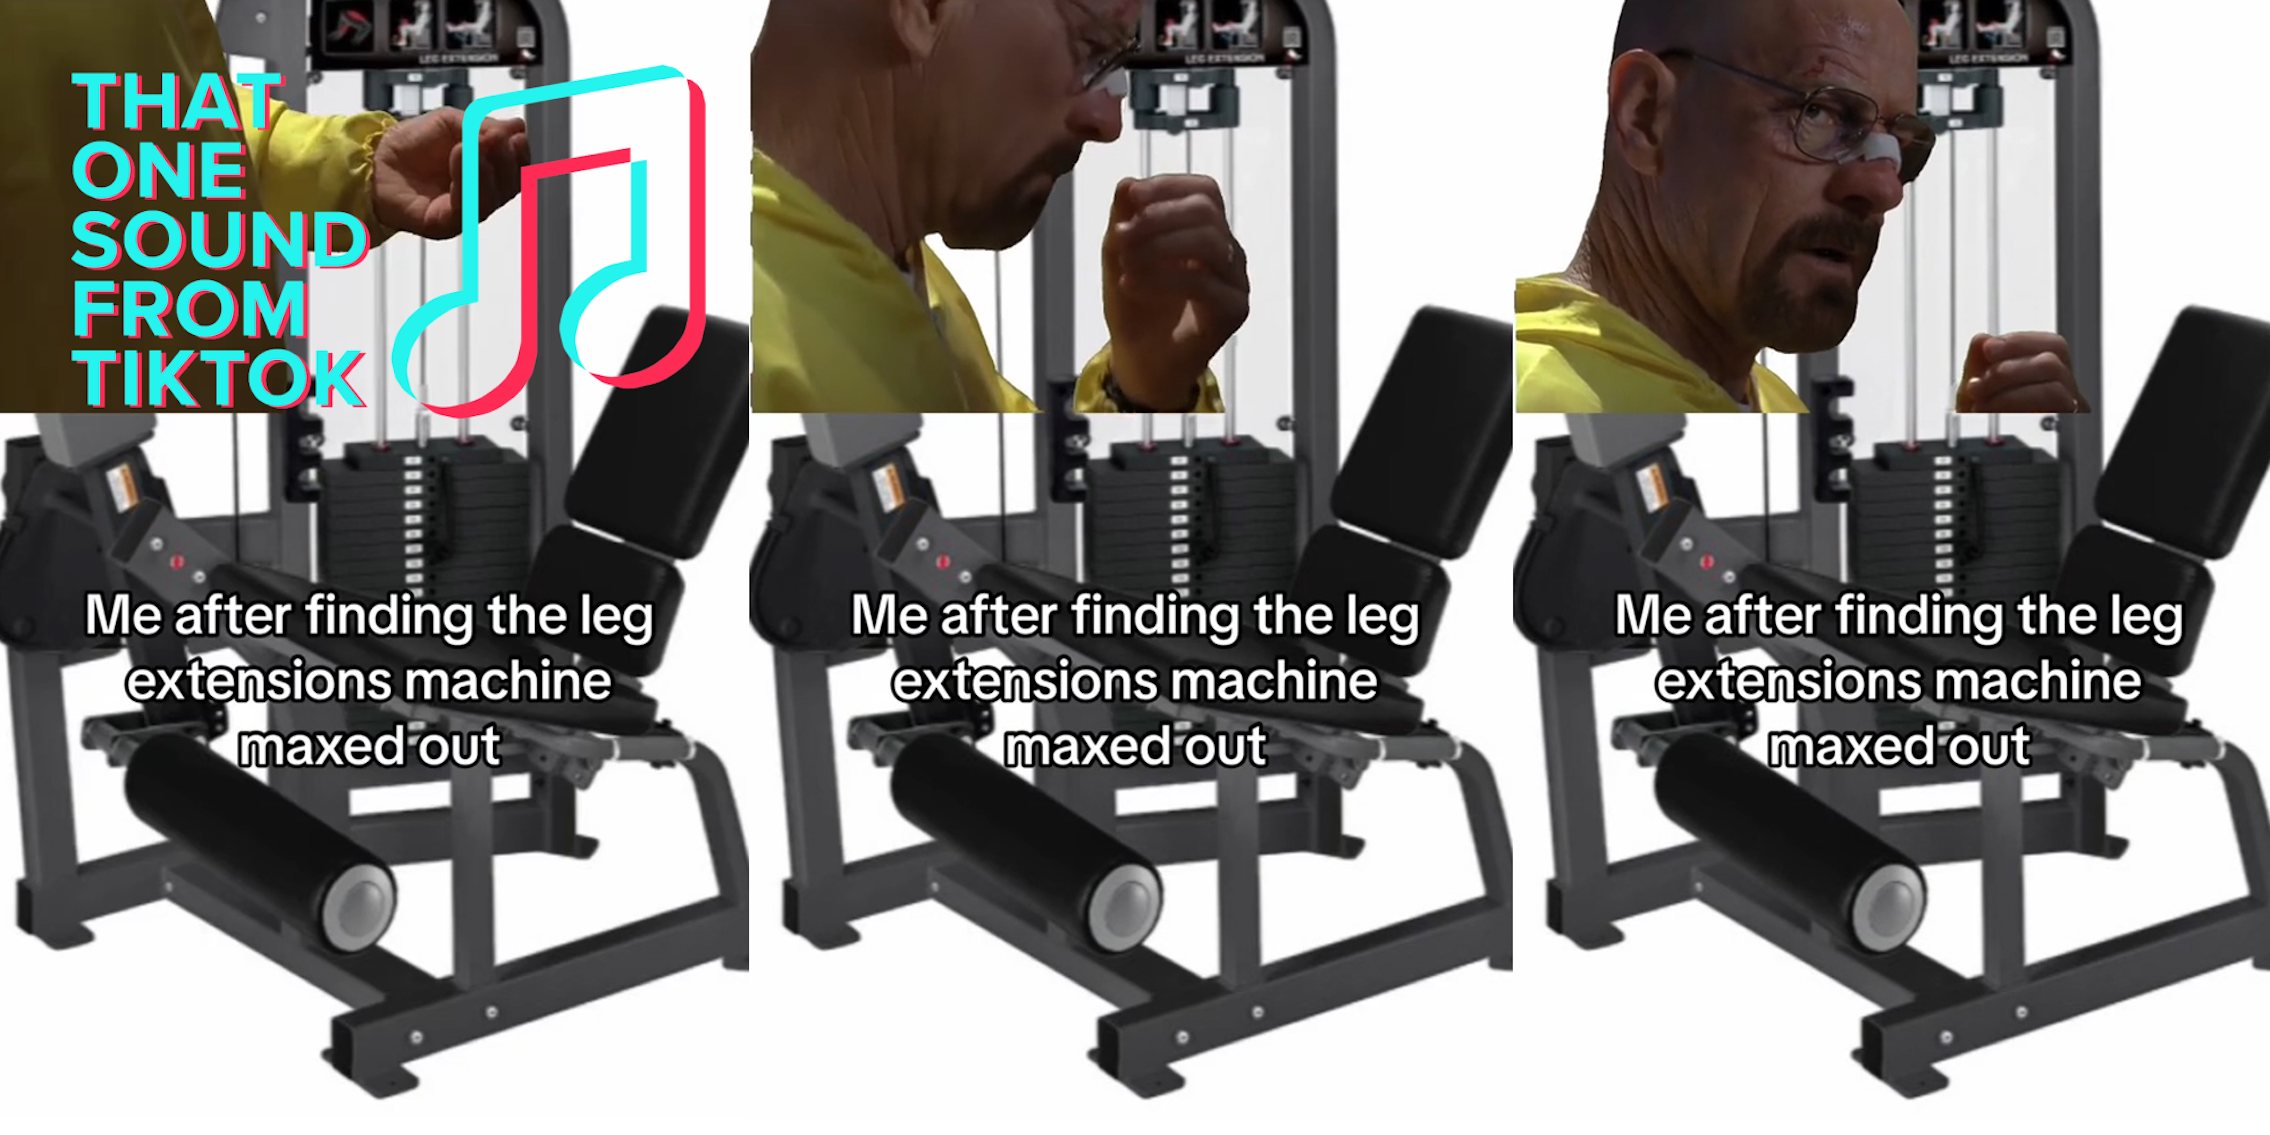 Walter White Breaking Bad meme over image of exercise machine with caption 'Me after finding the leg extensions machine maxed out' with THAT ONE SOUND ON TIKTOK logo at top (l) Walter White Breaking Bad meme over image of exercise machine with caption 'Me after finding the leg extensions machine maxed out' (c) Walter White Breaking Bad meme over image of exercise machine with caption 'Me after finding the leg extensions machine maxed out' (r)